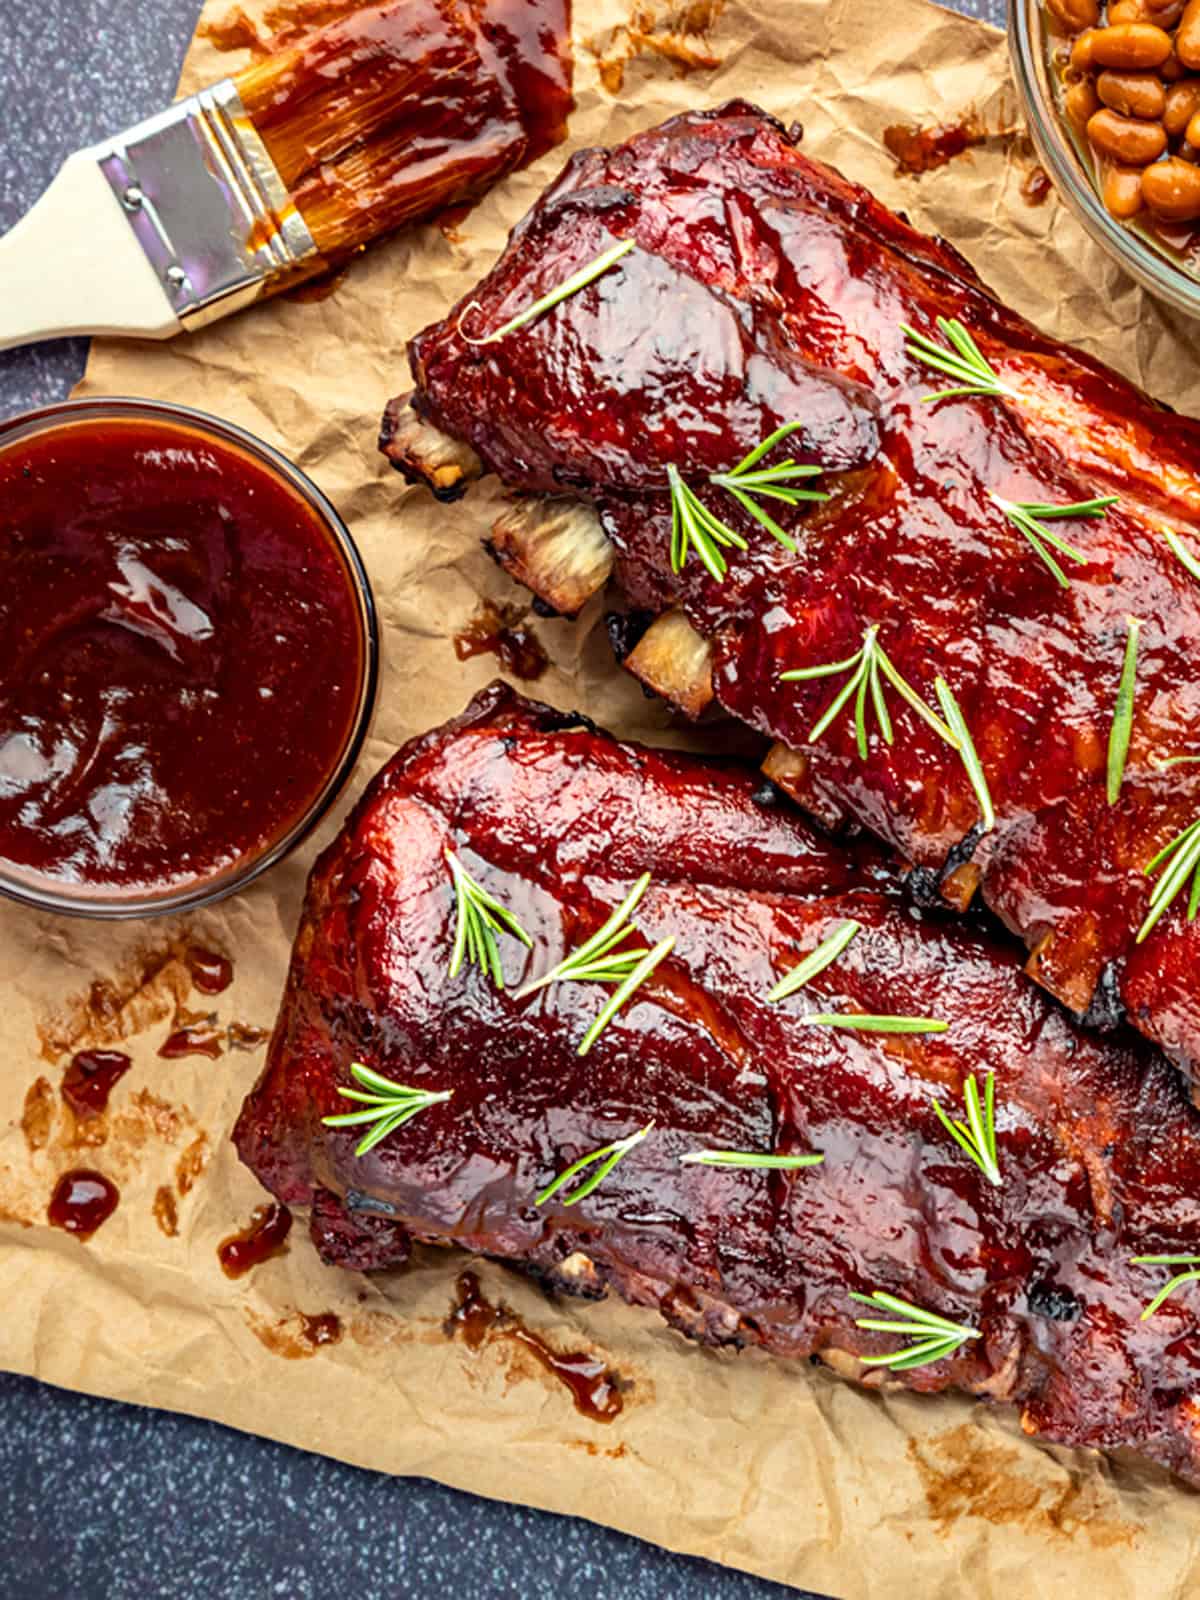 barbecue ribs recipe baby back bbq smoked smoker grill oven baked method best juicy fork tender pork easy